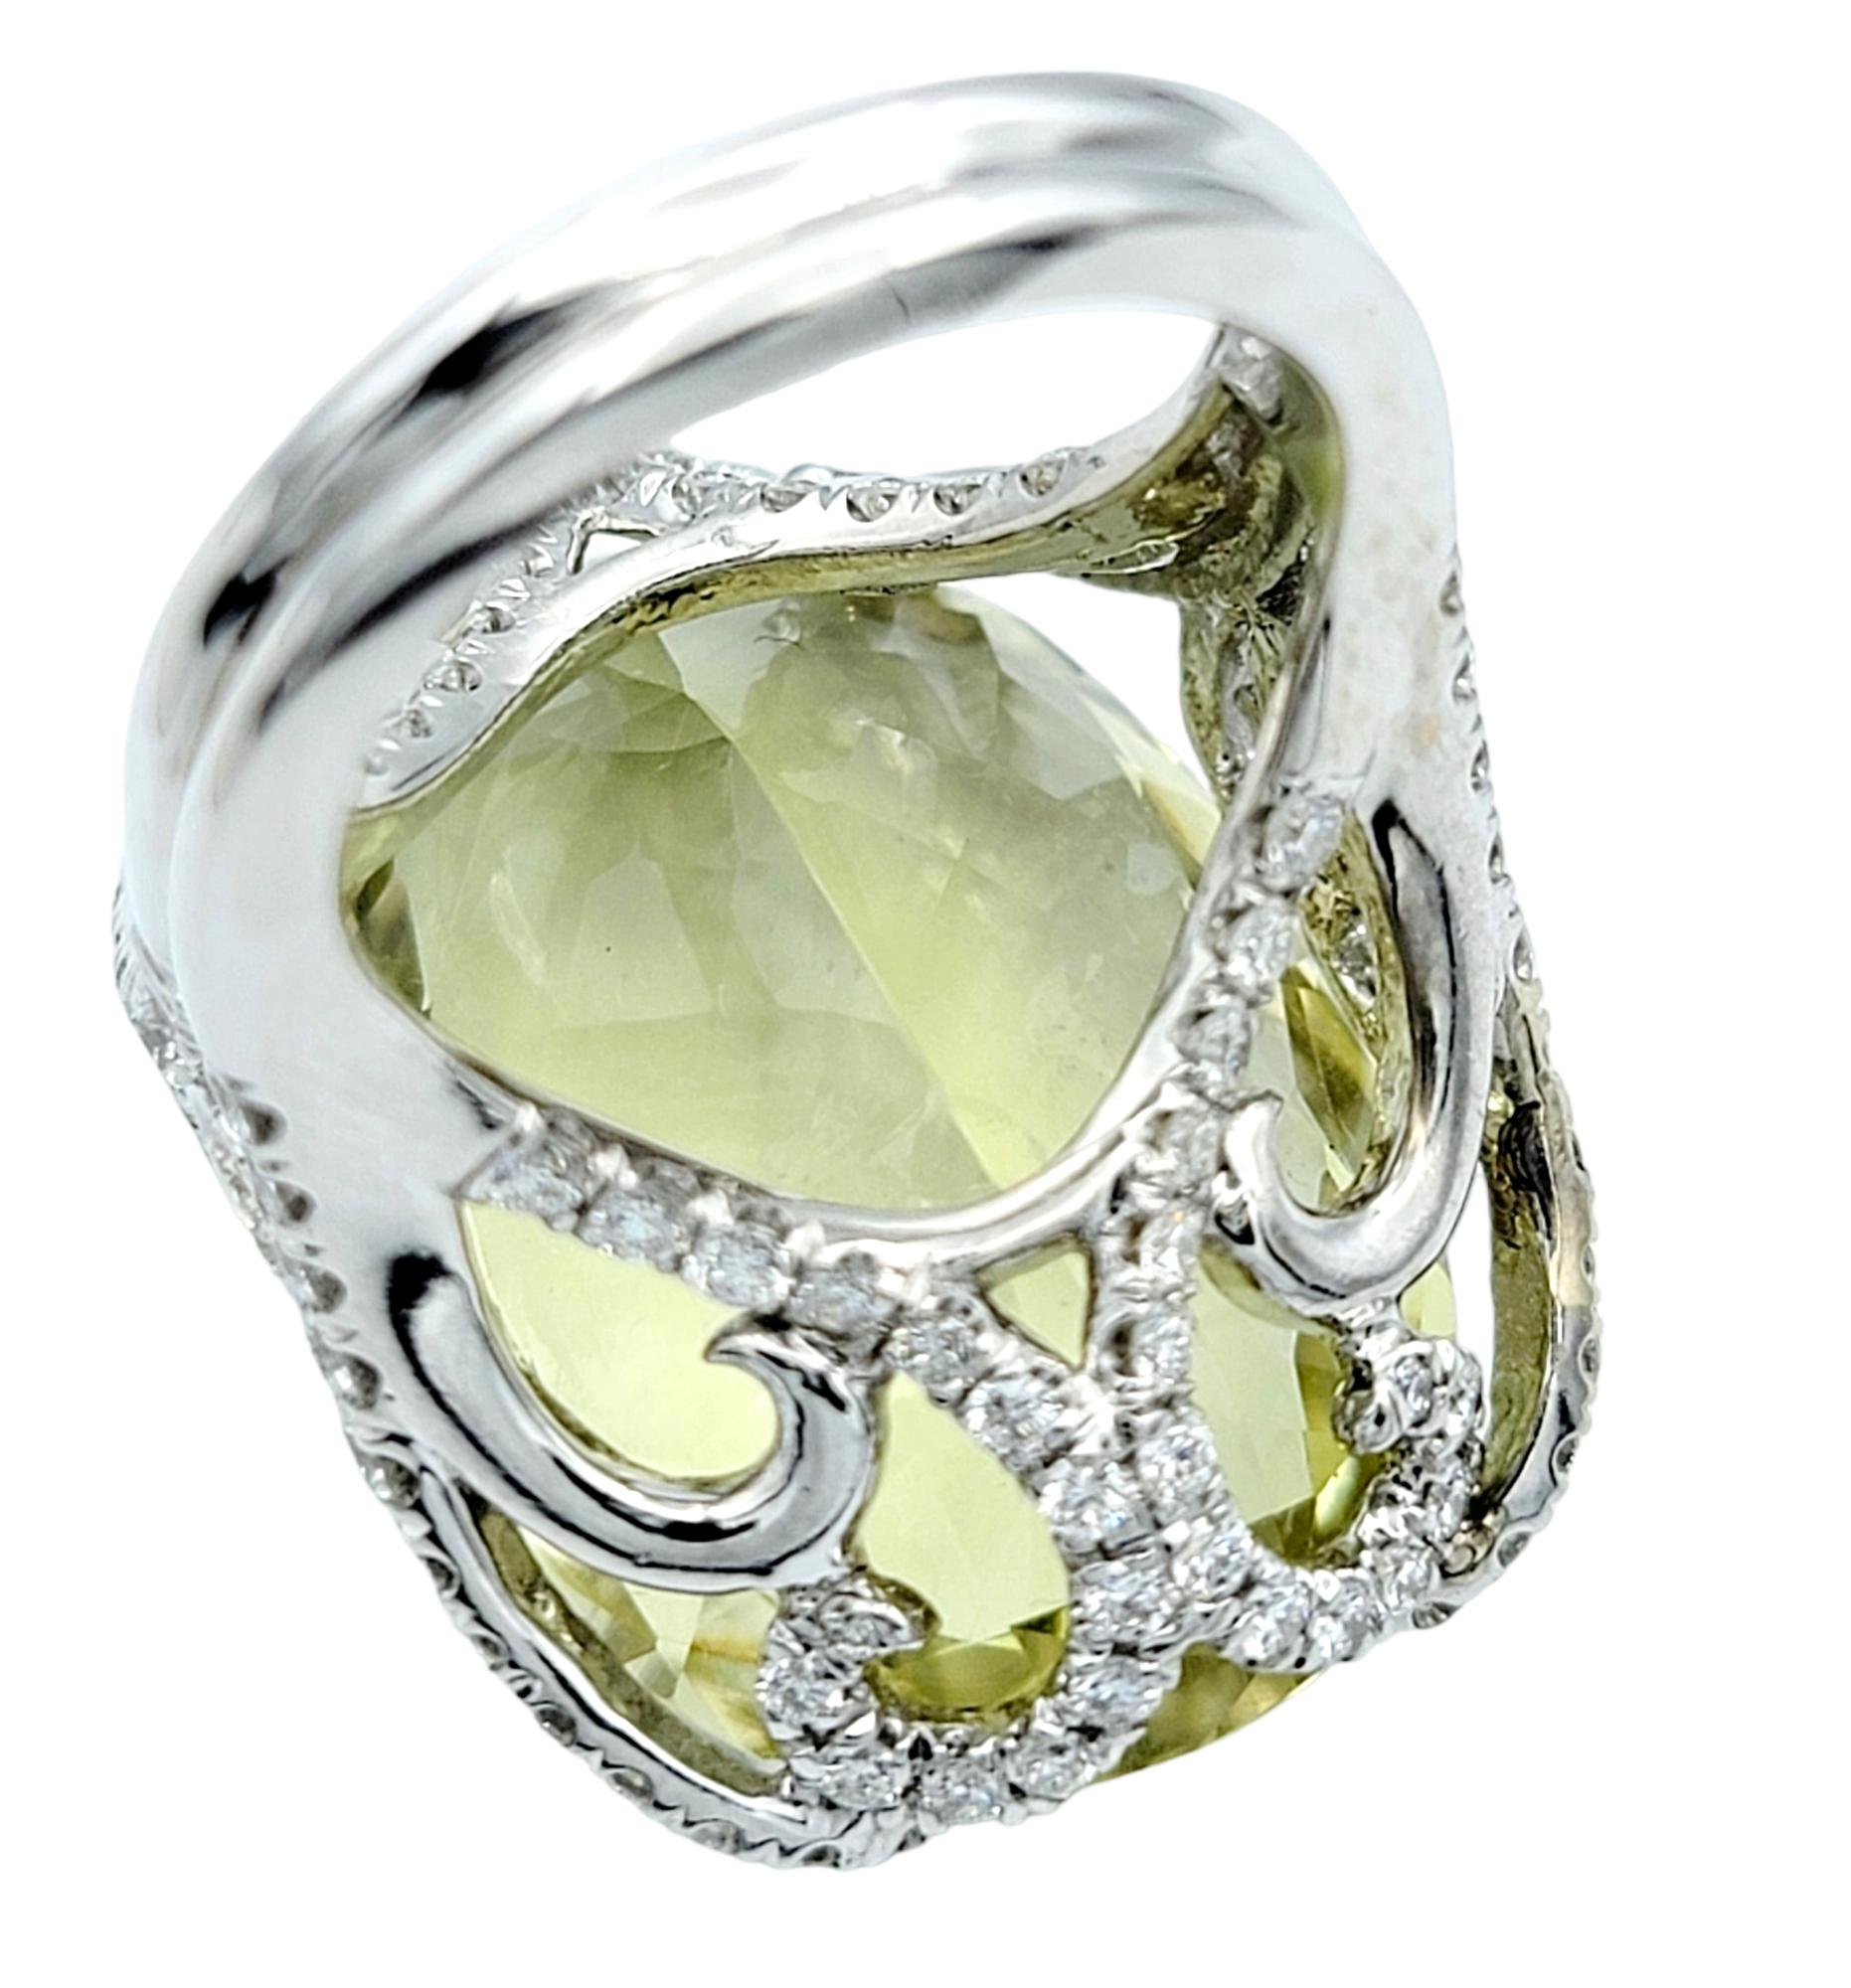 Huge 31.0 Carat Oval Cut Prasiolite Cocktail Ring with Diamond Accents 14K Gold For Sale 2